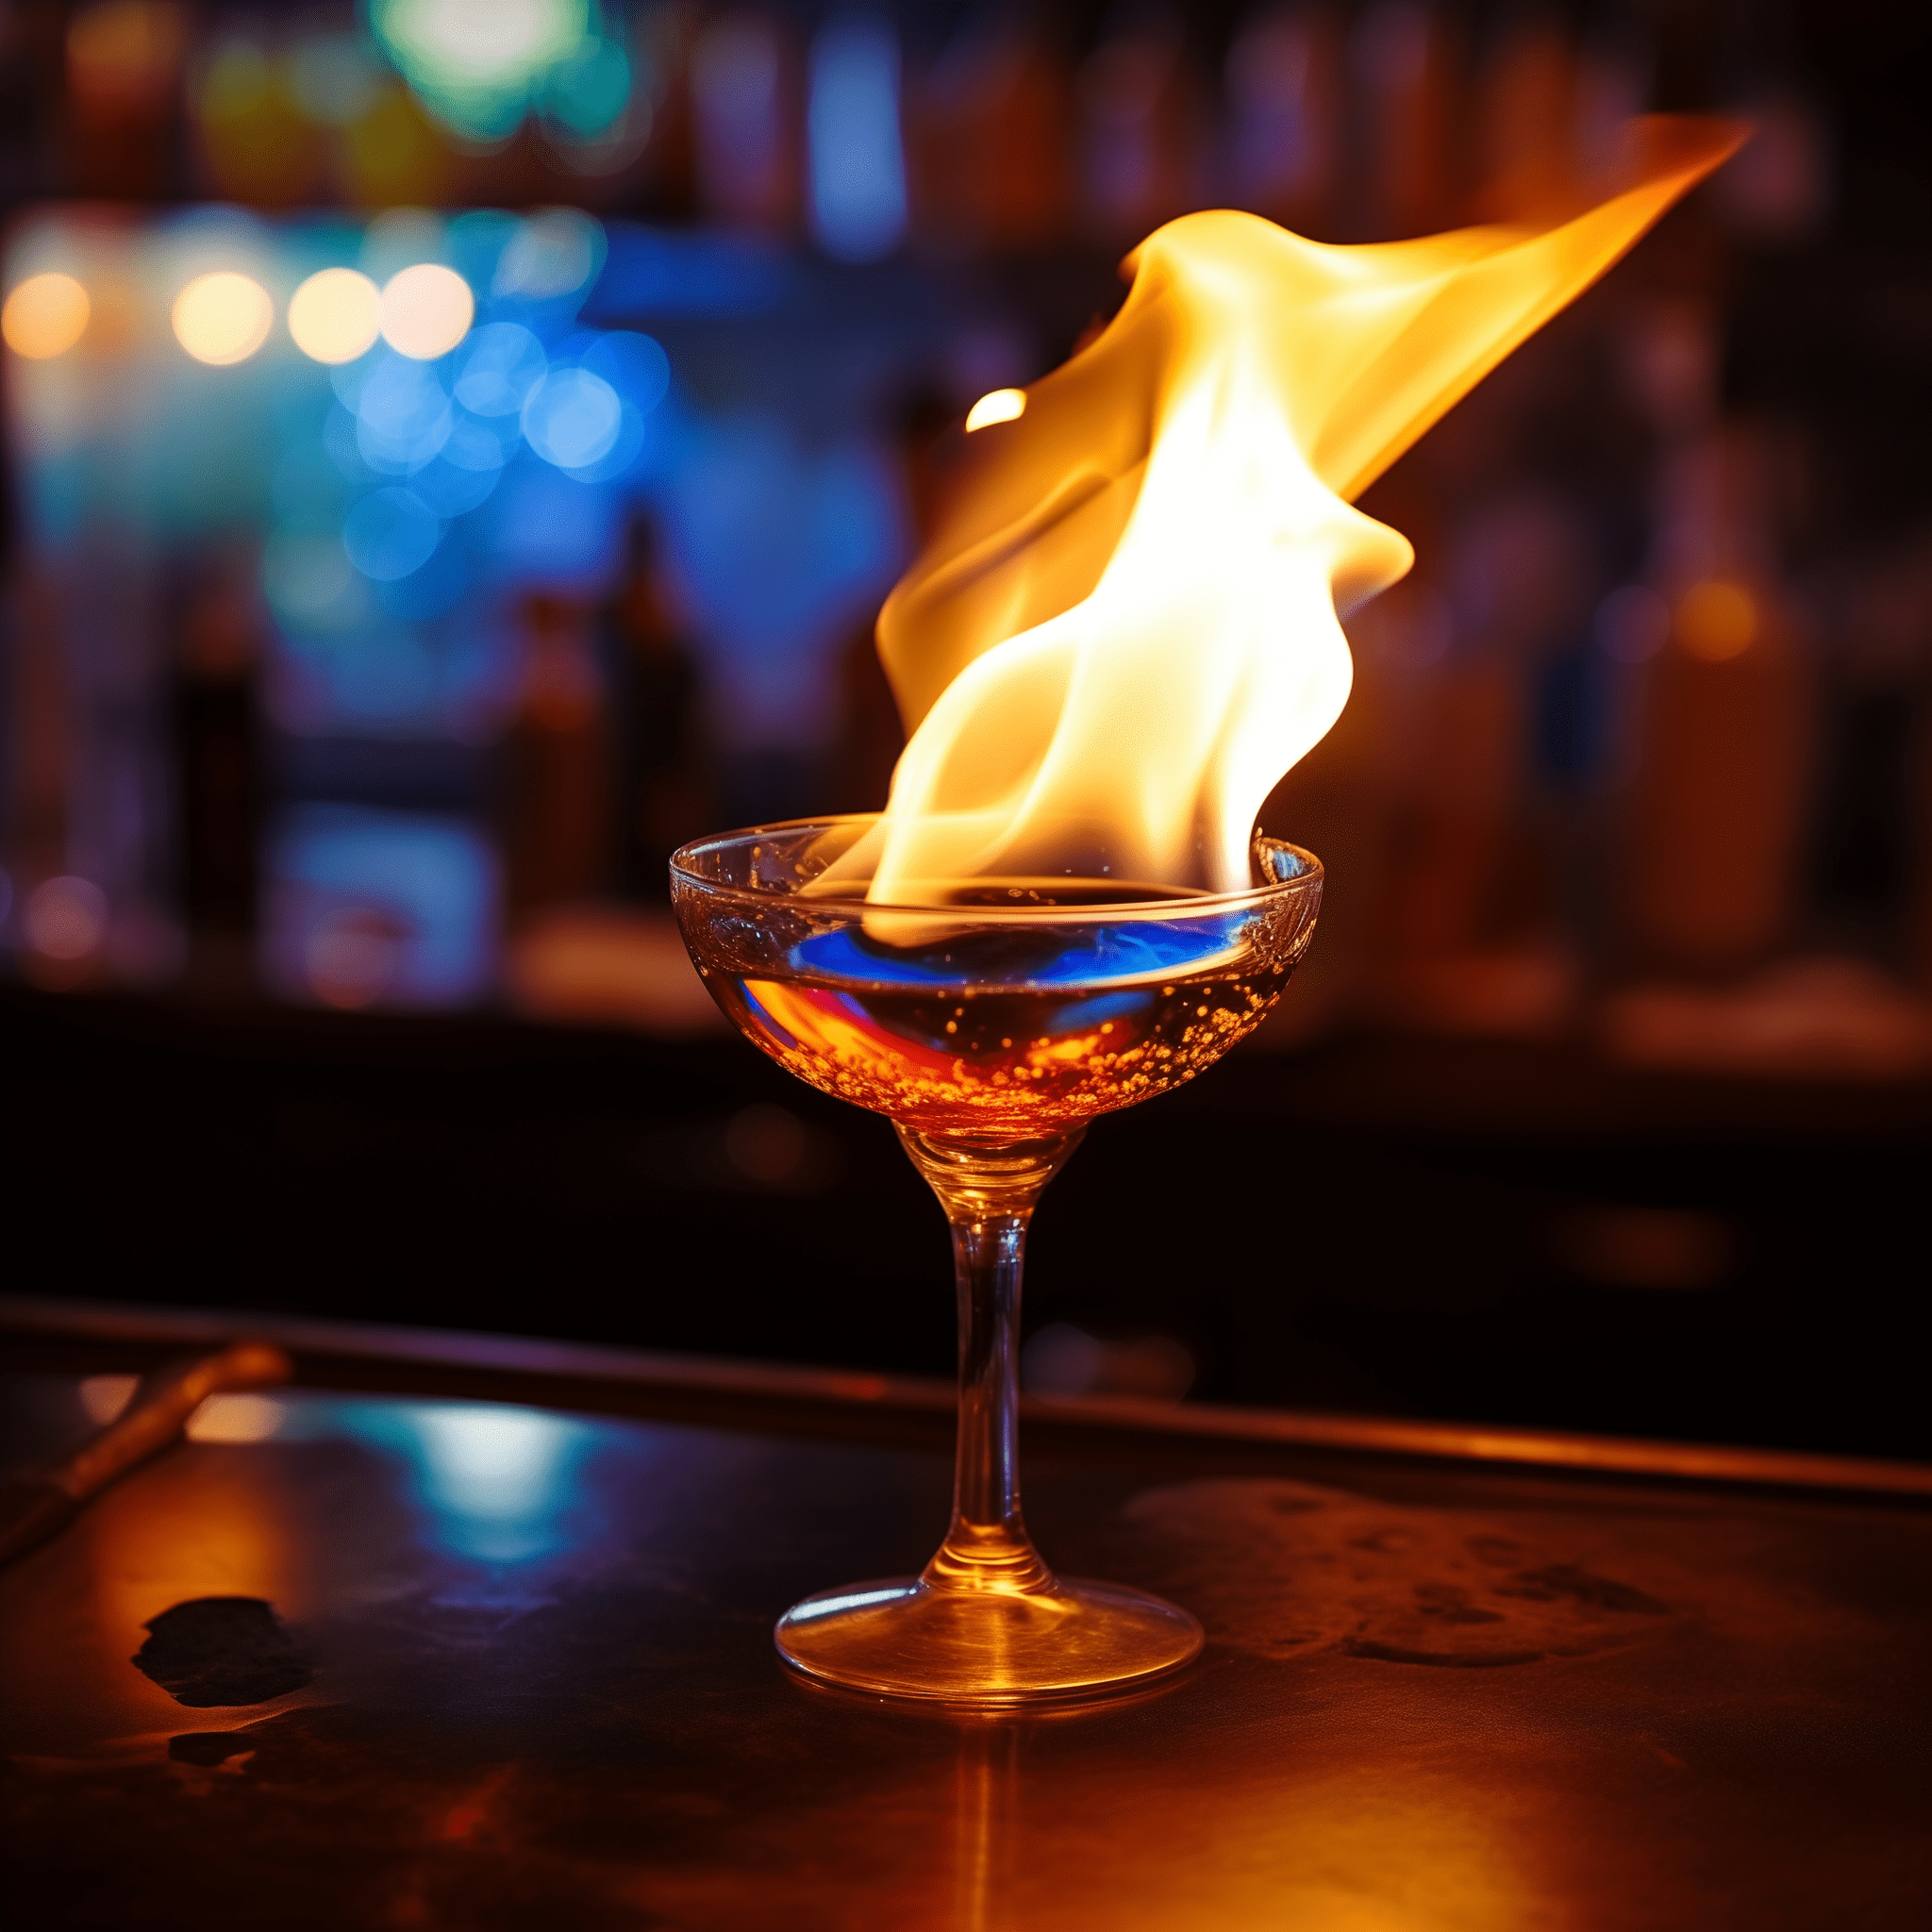 Flaming Lamborghini Cocktail Recipe - The Flaming Lamborghini is a potent concoction with a complex taste profile. It's sweet, creamy, and has a strong licorice flavor from the Sambuca, complemented by the coffee notes of Kahlua and the citrus kick from the Bols Blue Curacao.